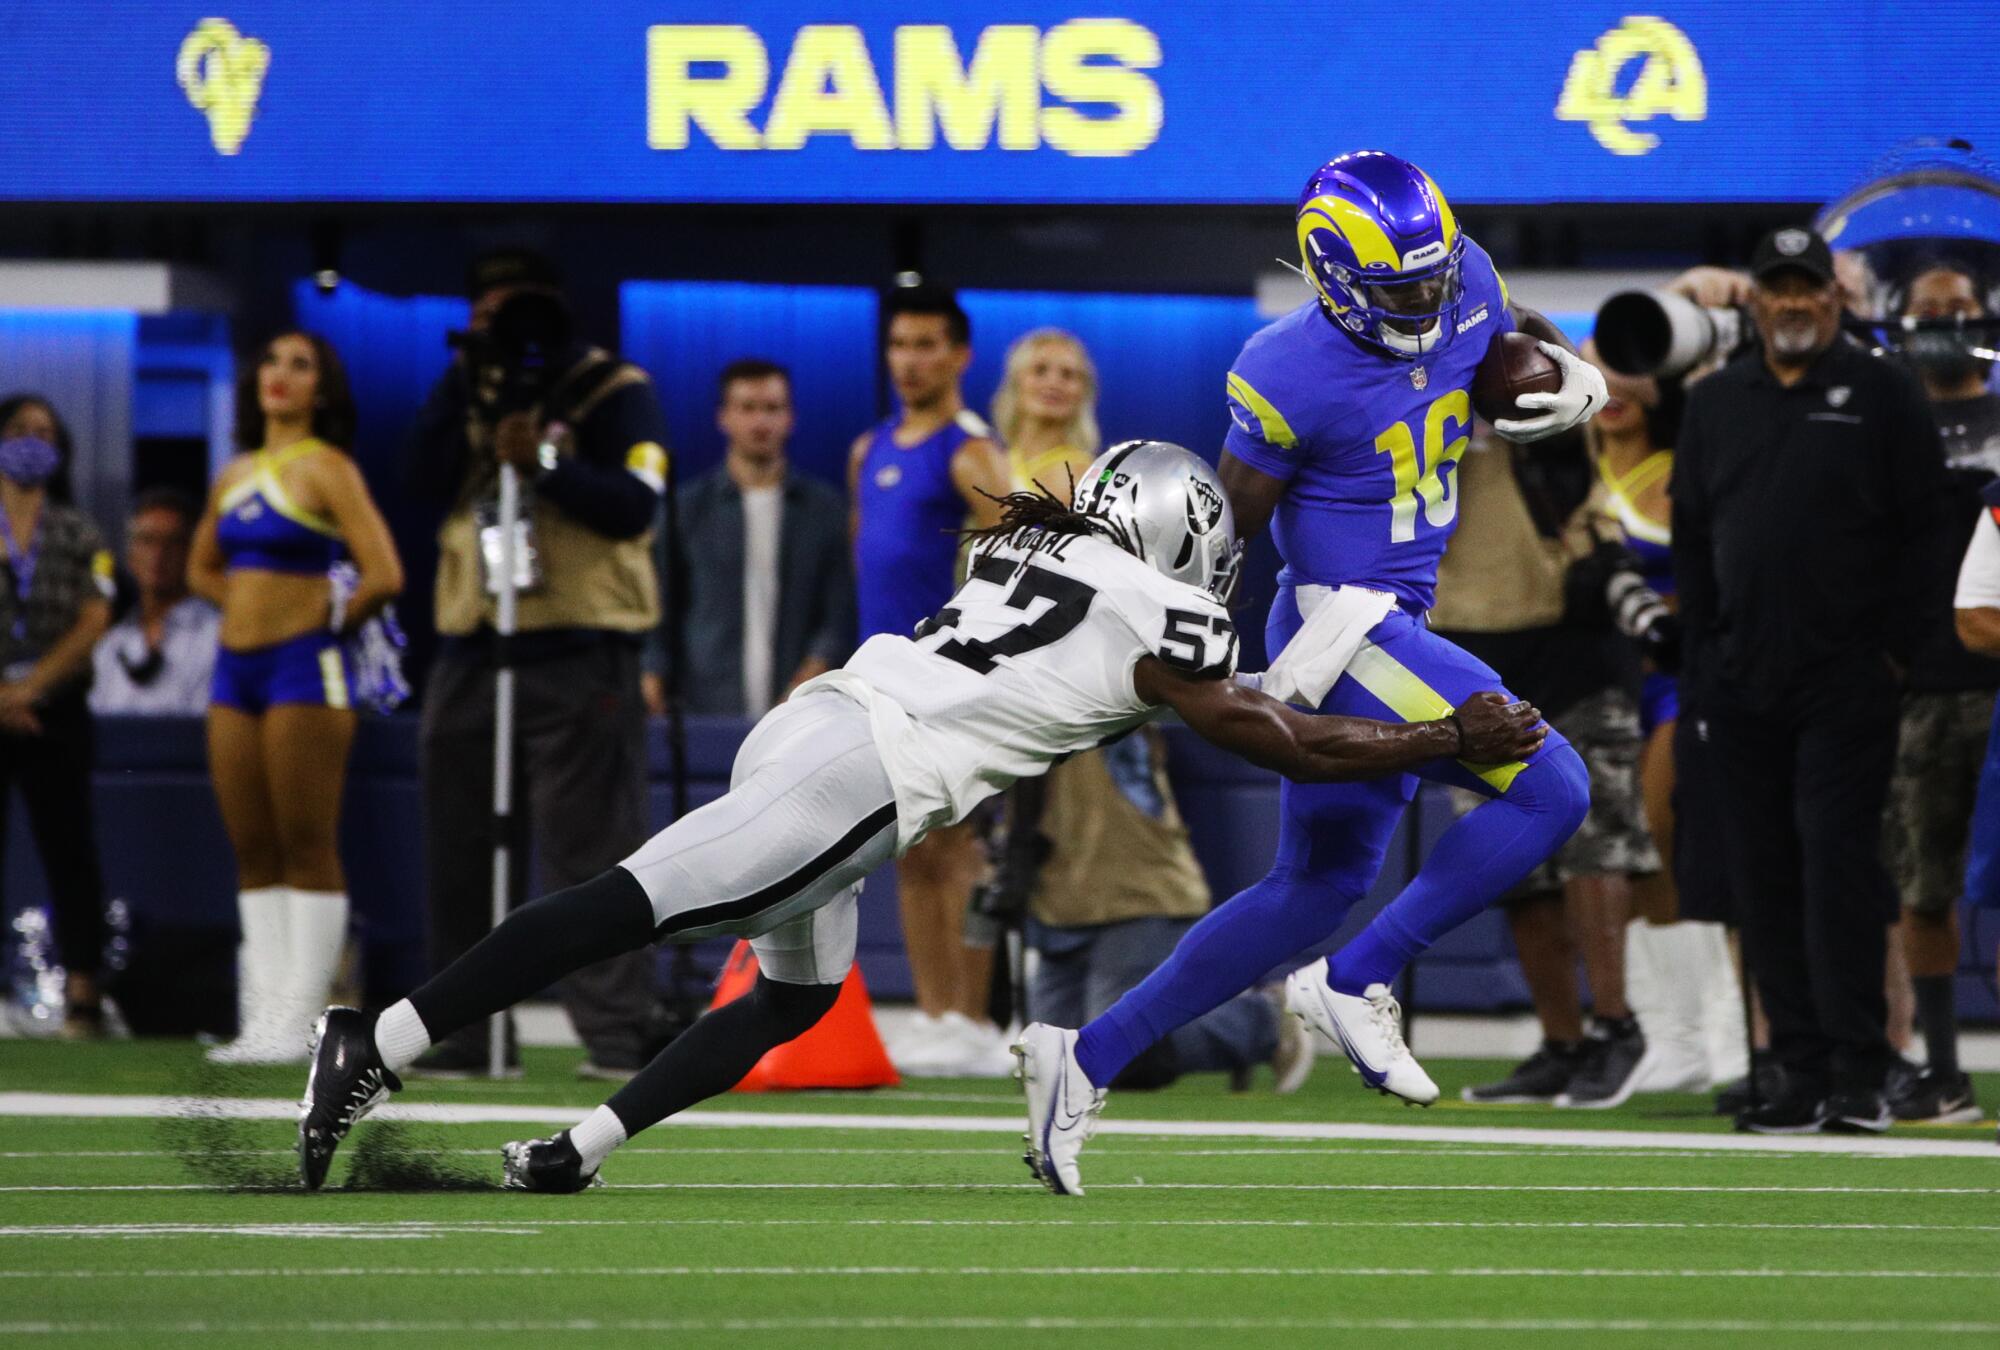 Rams quarterback Bryce Perkins scampers for extra yardage before being tackled by Raiders linebacker Asmar Bilal.